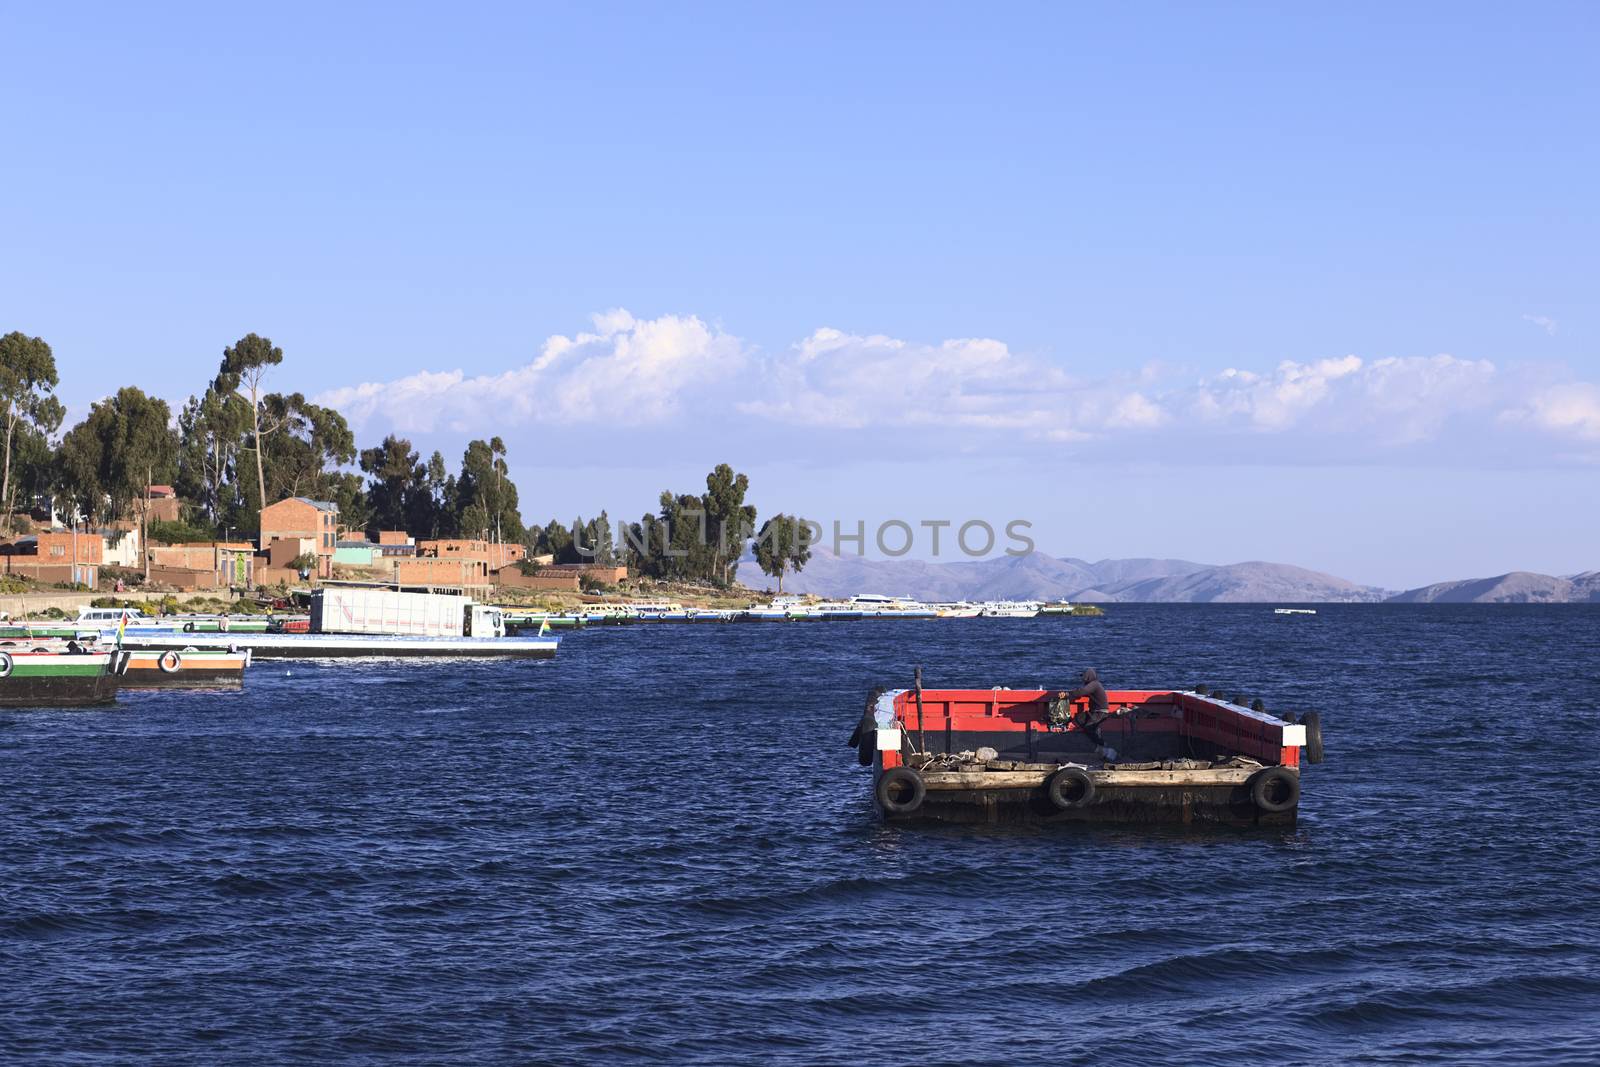 TIQUINA, BOLIVIA - OCTOBER 16, 2014: Empty wooden ferry on Lake Titicaca at the Strait of Tiquina on October 16, 2014 in San Pablo de Tiquina, Bolivia. Vehicles are being transported over on these wooden ferries, passengers and pedestrians have to use small motorboats to cross.